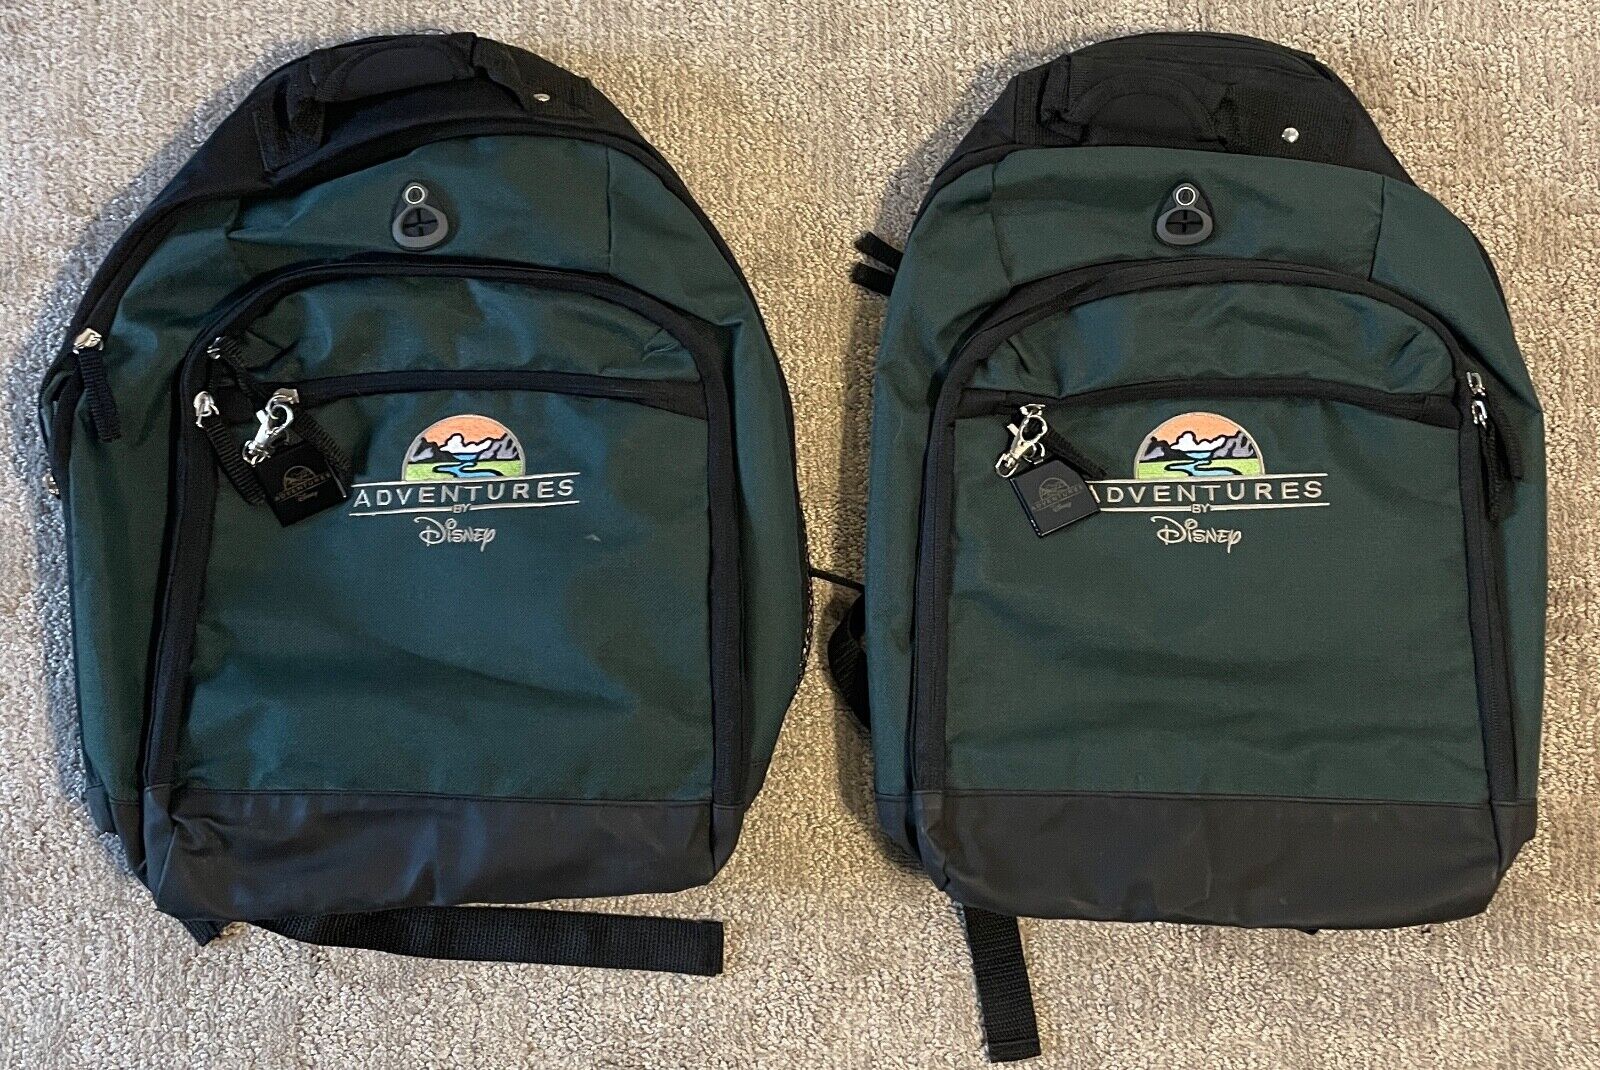 Set 2 Adventures by Disney Matching Backpacks Bags Parks Forest Green